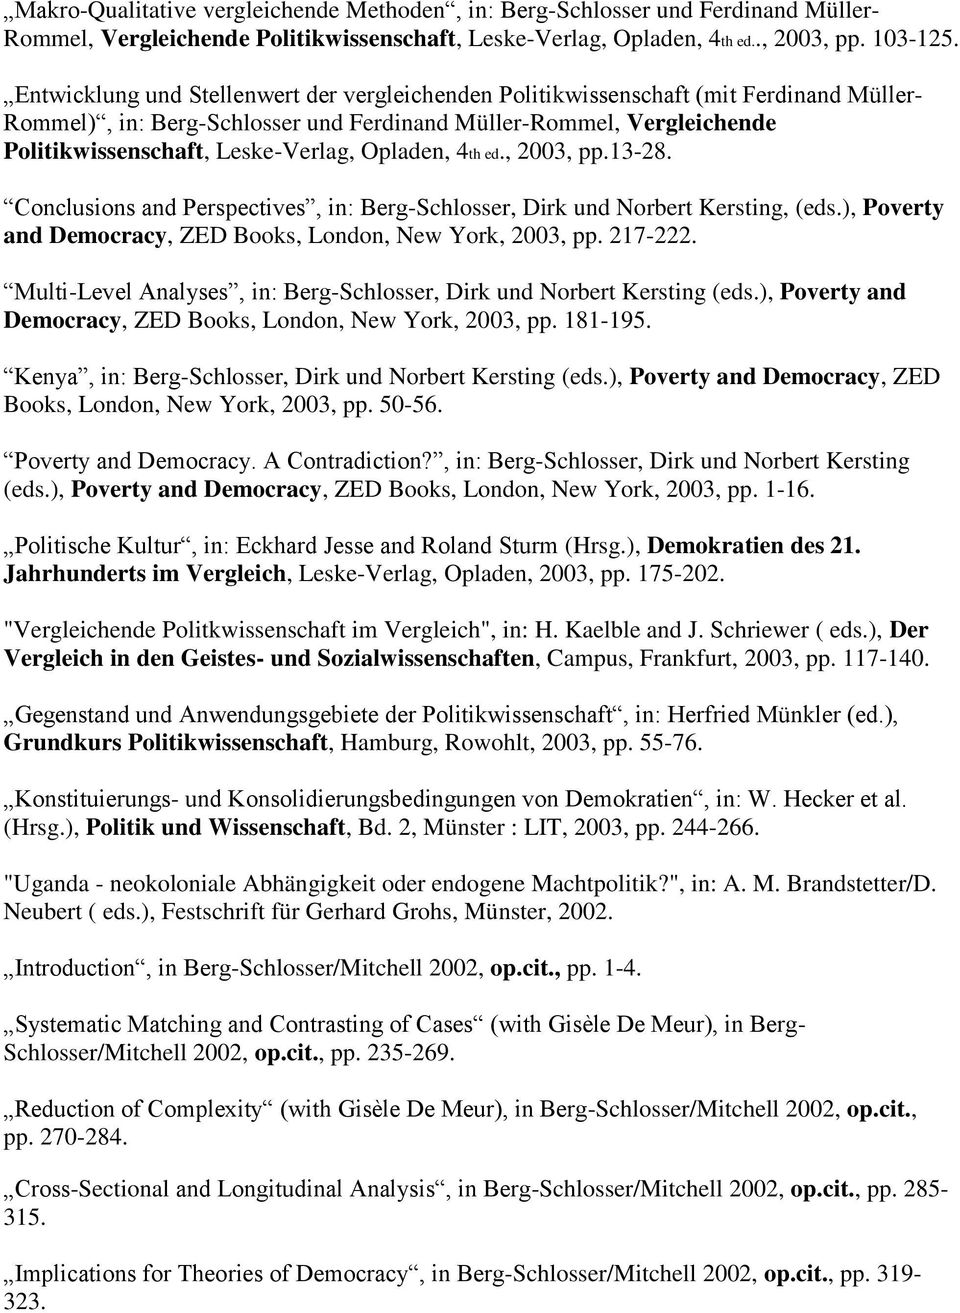 Opladen, 4th ed., 2003, pp.13-28. Conclusions and Perspectives, in: Berg-Schlosser, Dirk und Norbert Kersting, (eds.), Poverty and Democracy, ZED Books, London, New York, 2003, pp. 217-222.